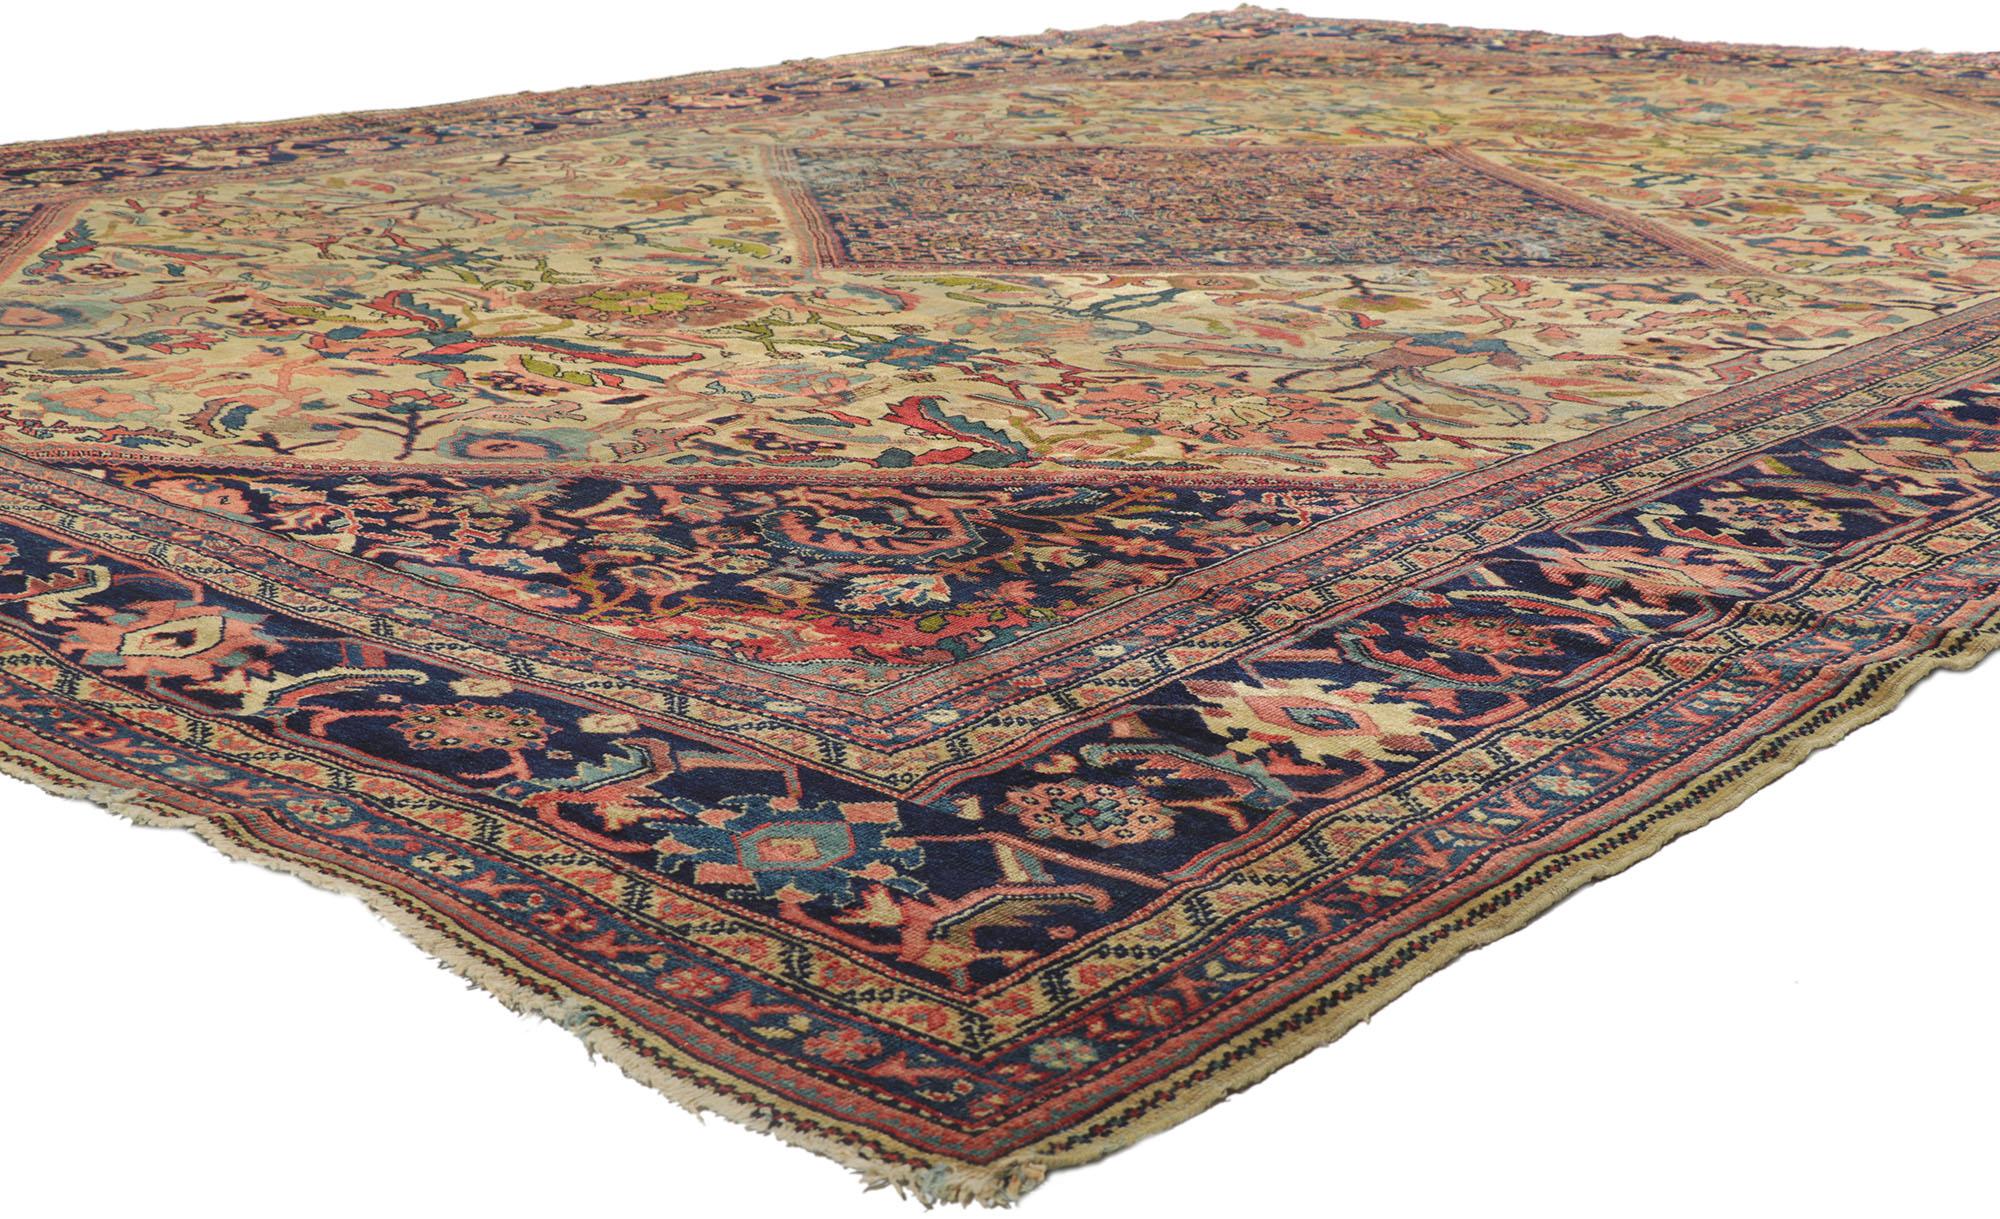 78058 Distressed Antique Persian Mahal Rug, 11'02 x 14'02. Rendered in variegated shades of beige, navy blue, rose, cerulean, sky blue, pink, tan, olive, taupe, baby blue, and mauve with other accent colors. Distressed. Desirable Age Wear.